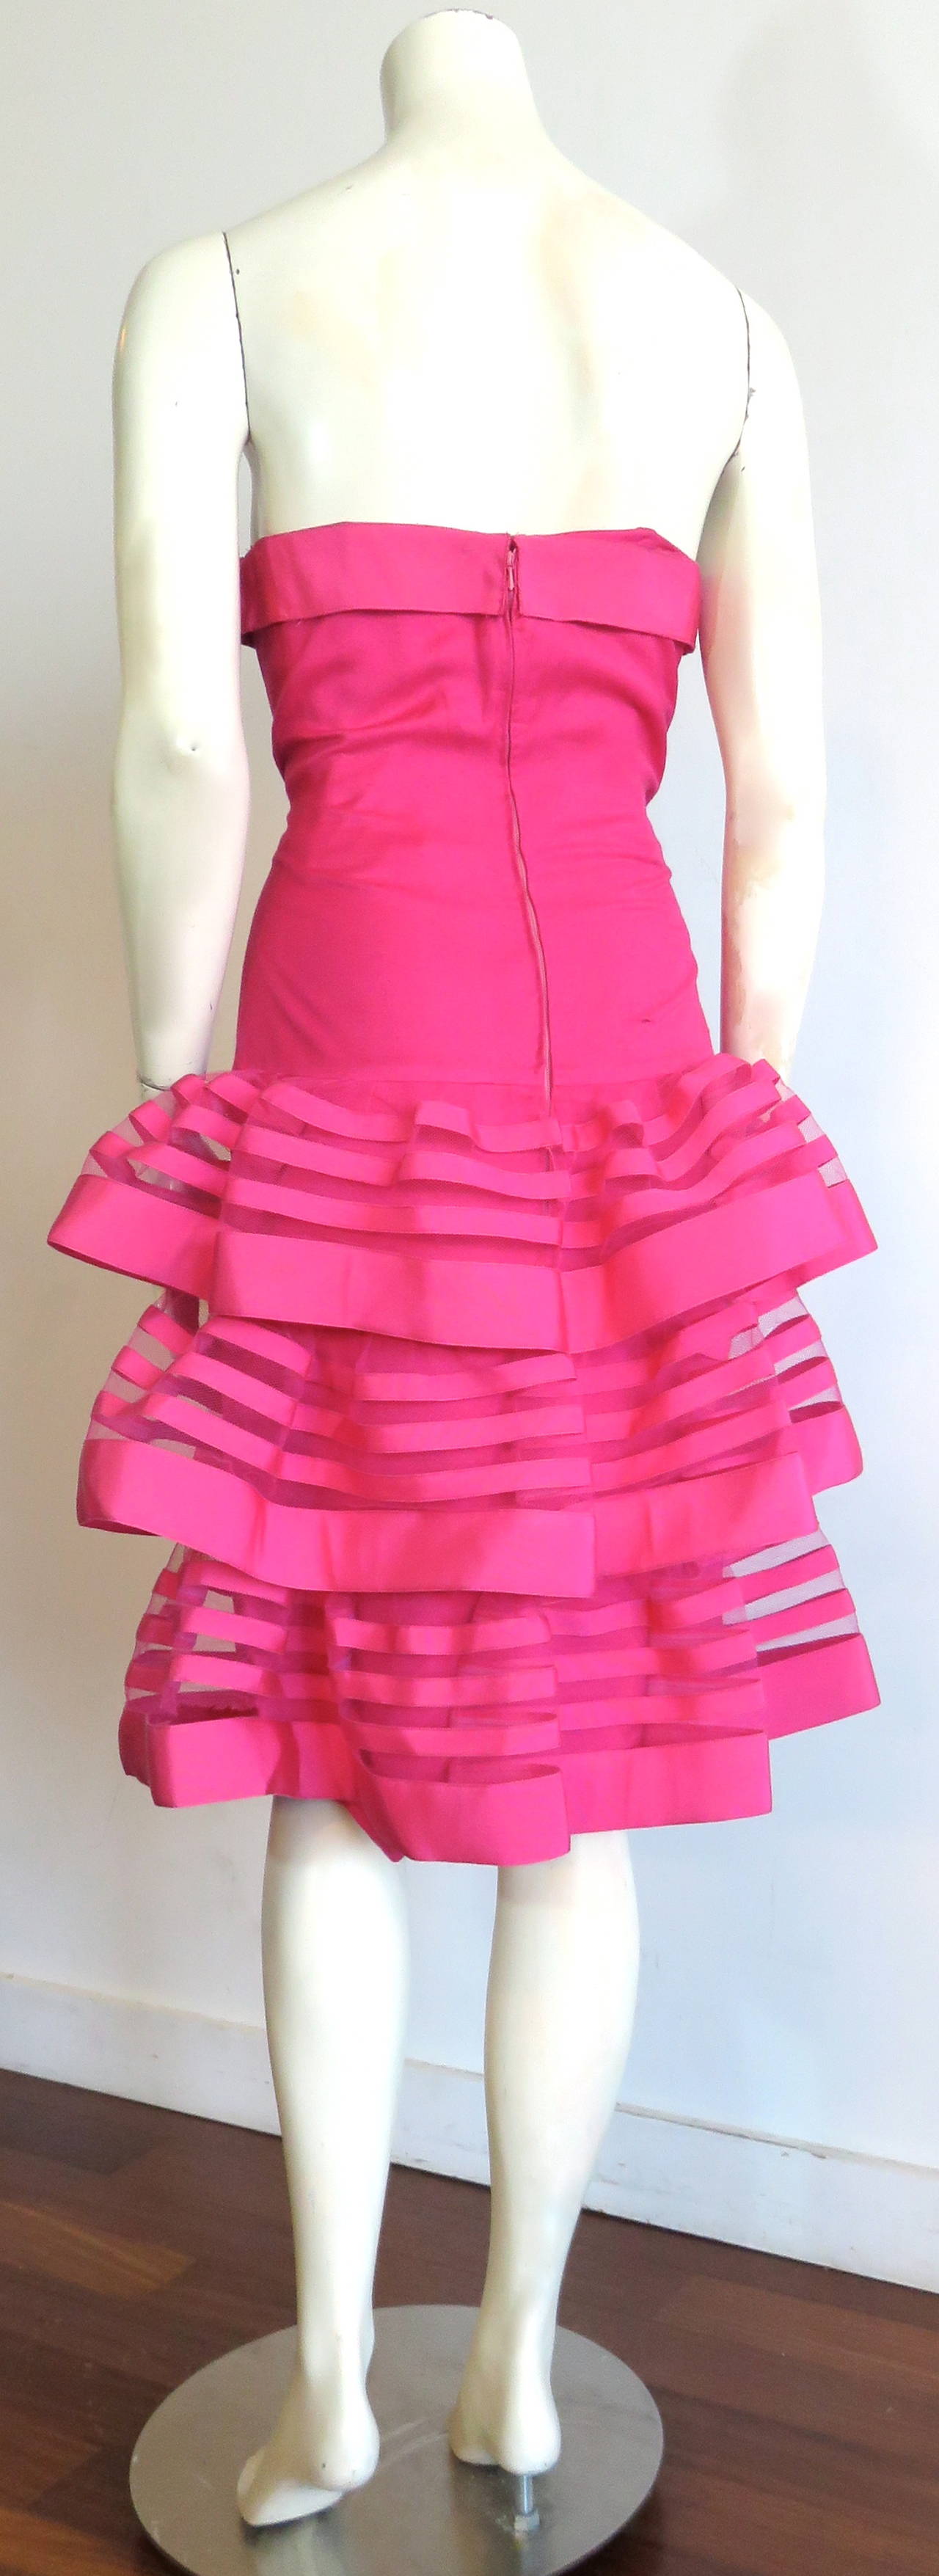 1970's NINA RICCI PARIS Hot pink tiered party dress In Good Condition For Sale In Newport Beach, CA